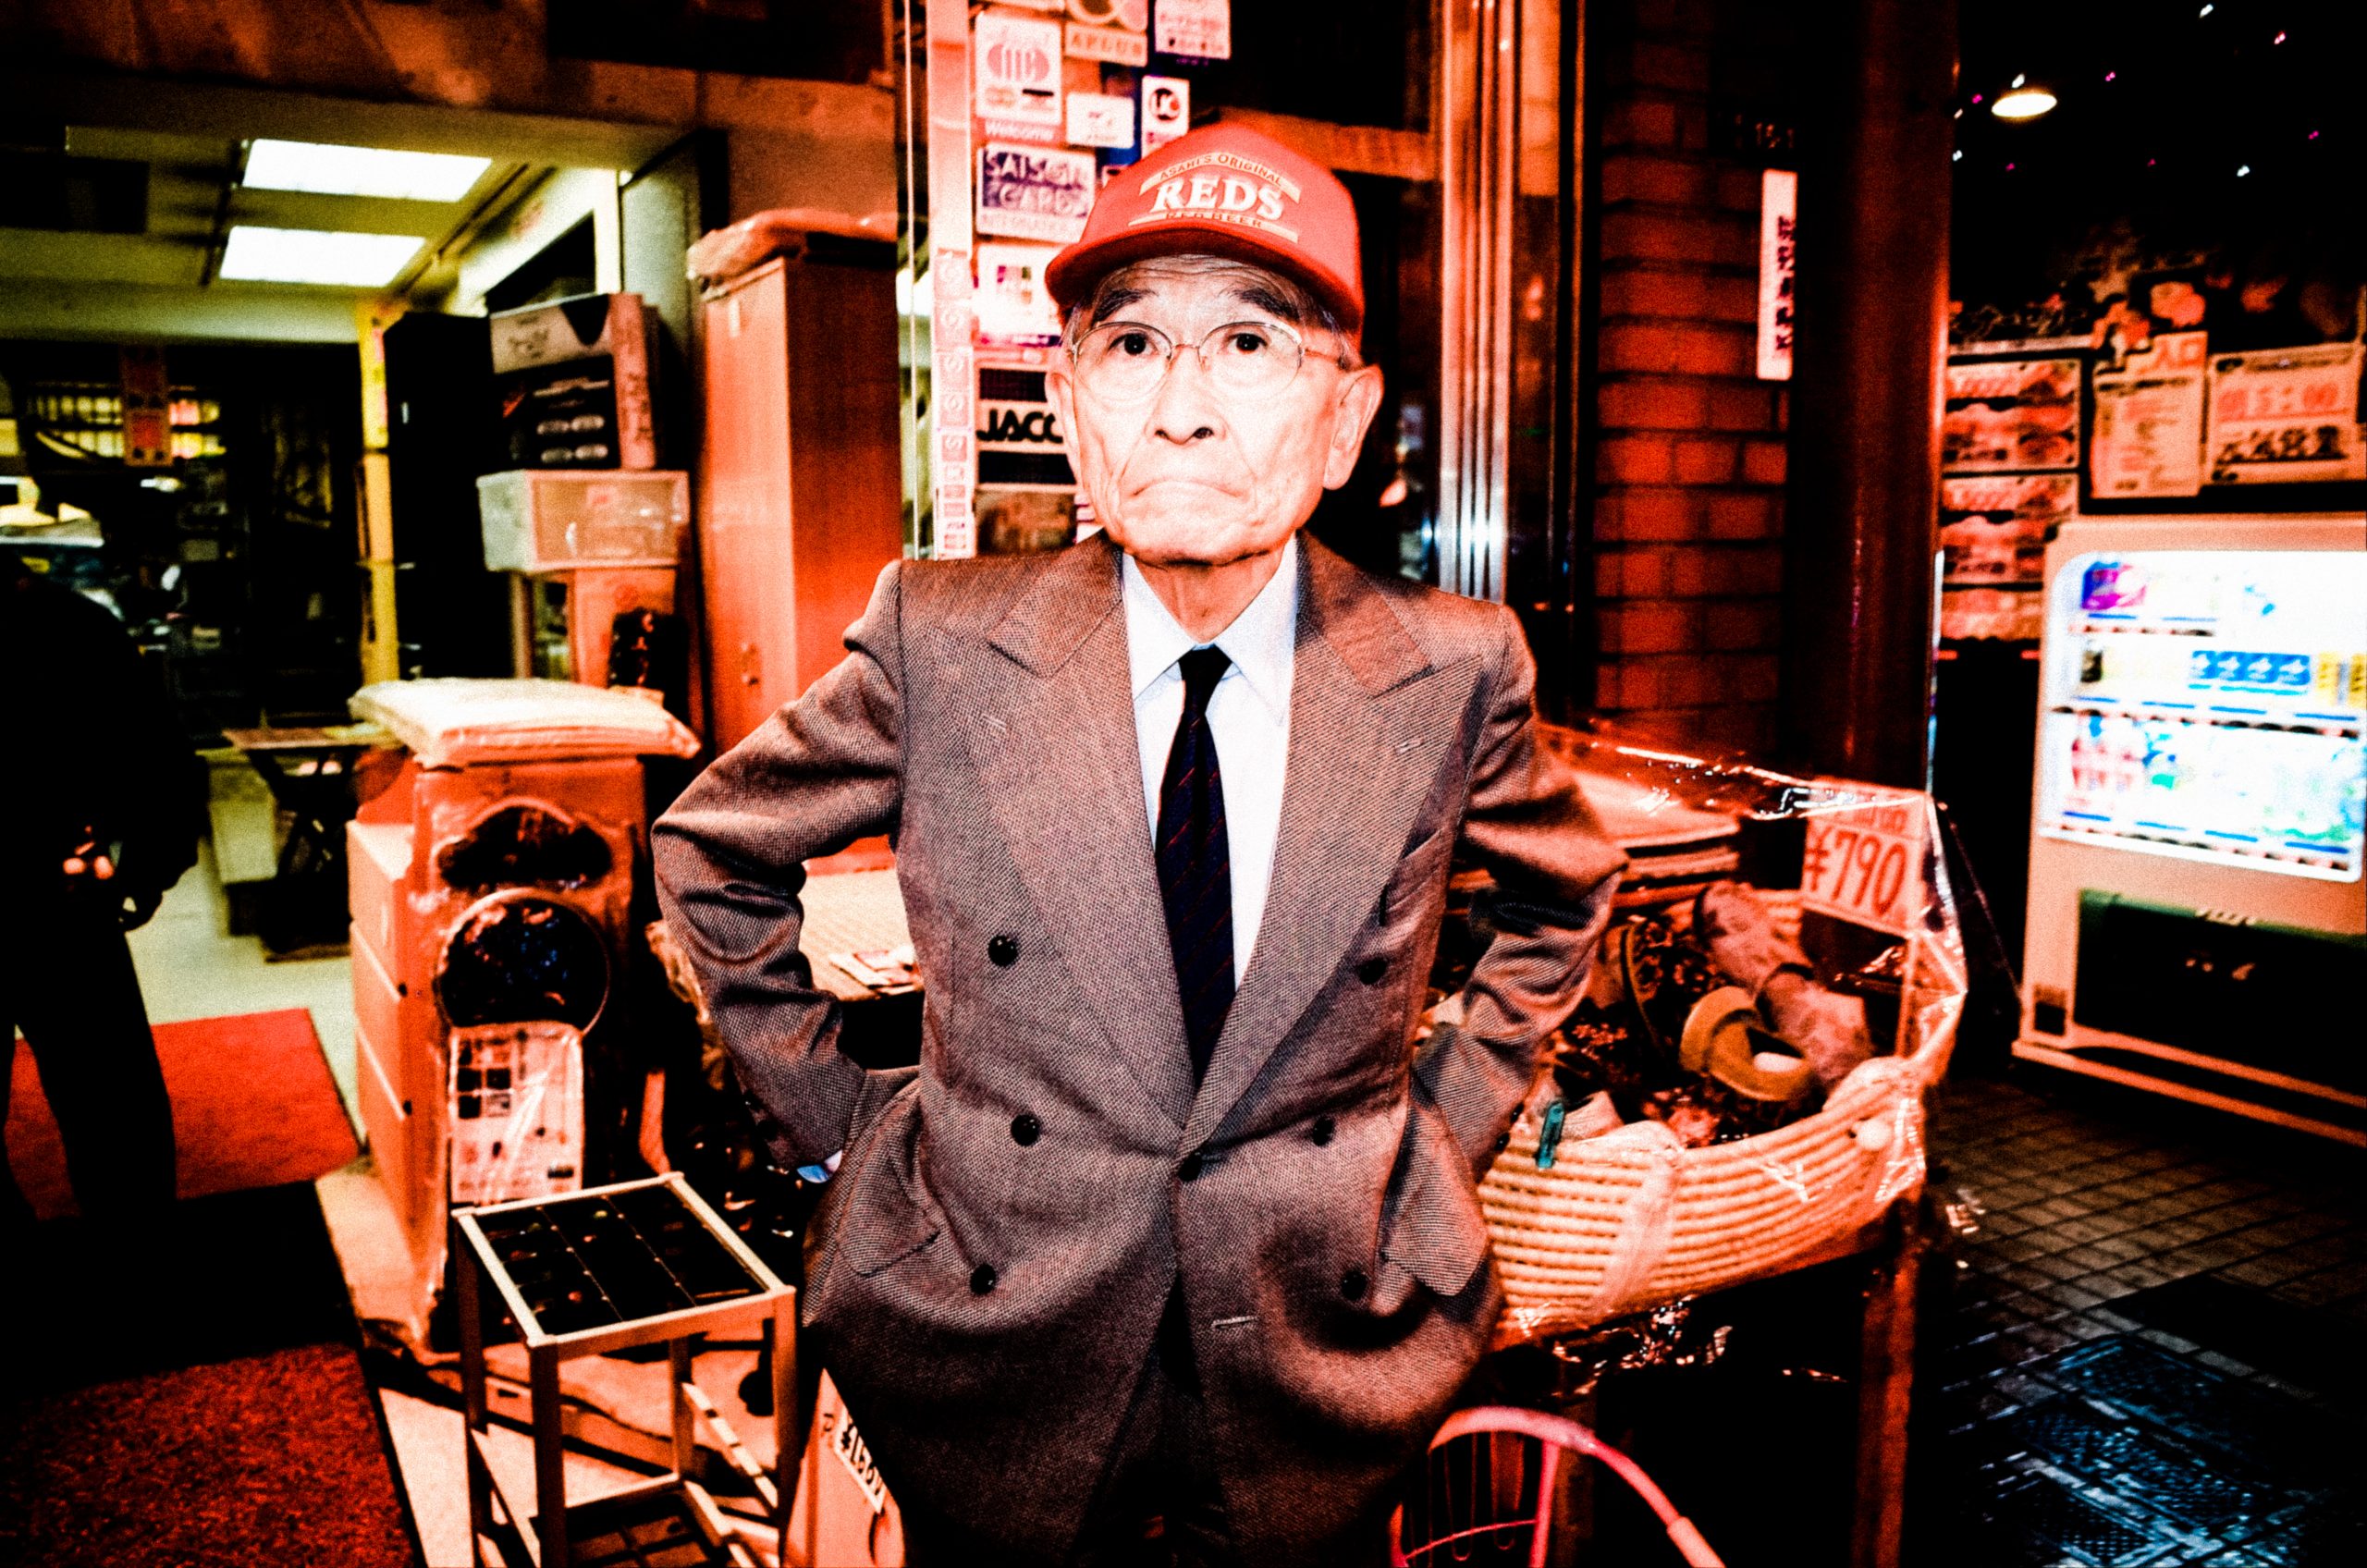 Tokyo man red hat flash street photography without permission, flash, Ricoh gr ii